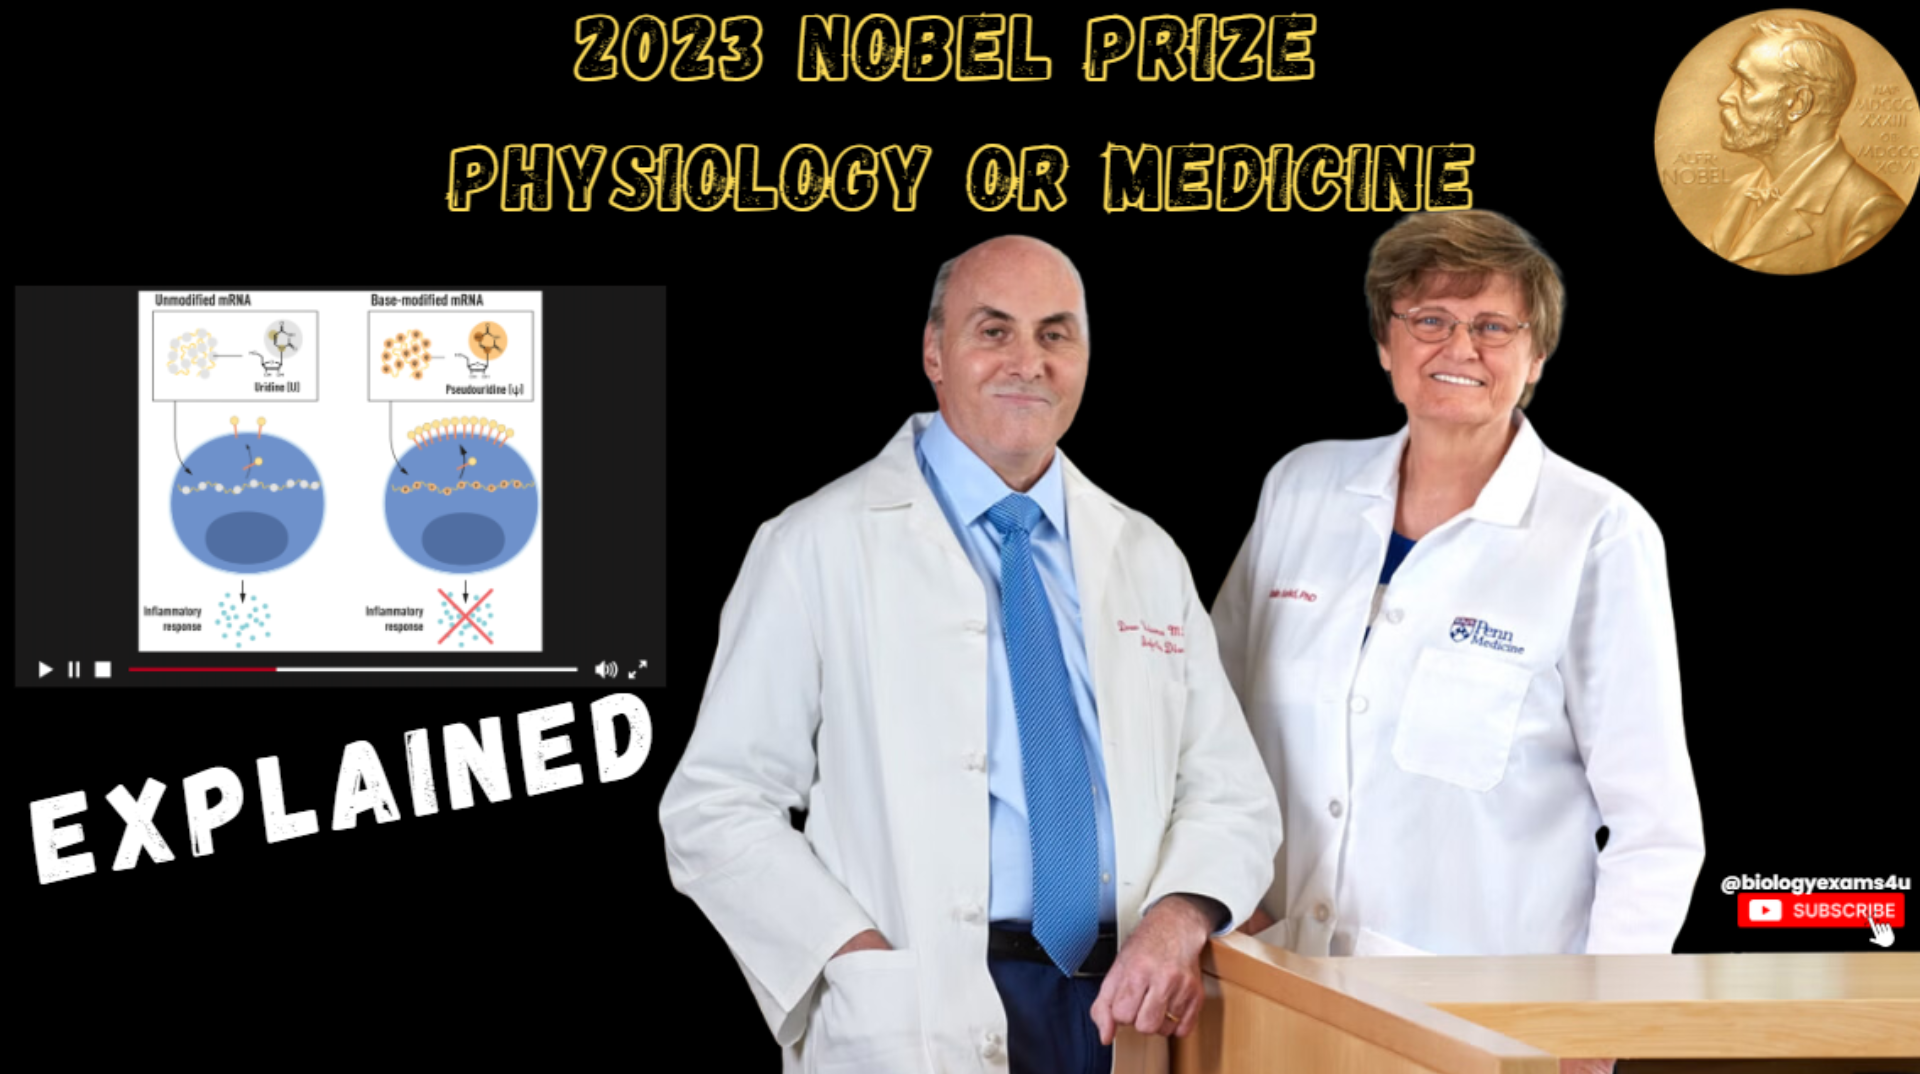 Explanation of 2023 Nobel Prize in Physiology or Medicine